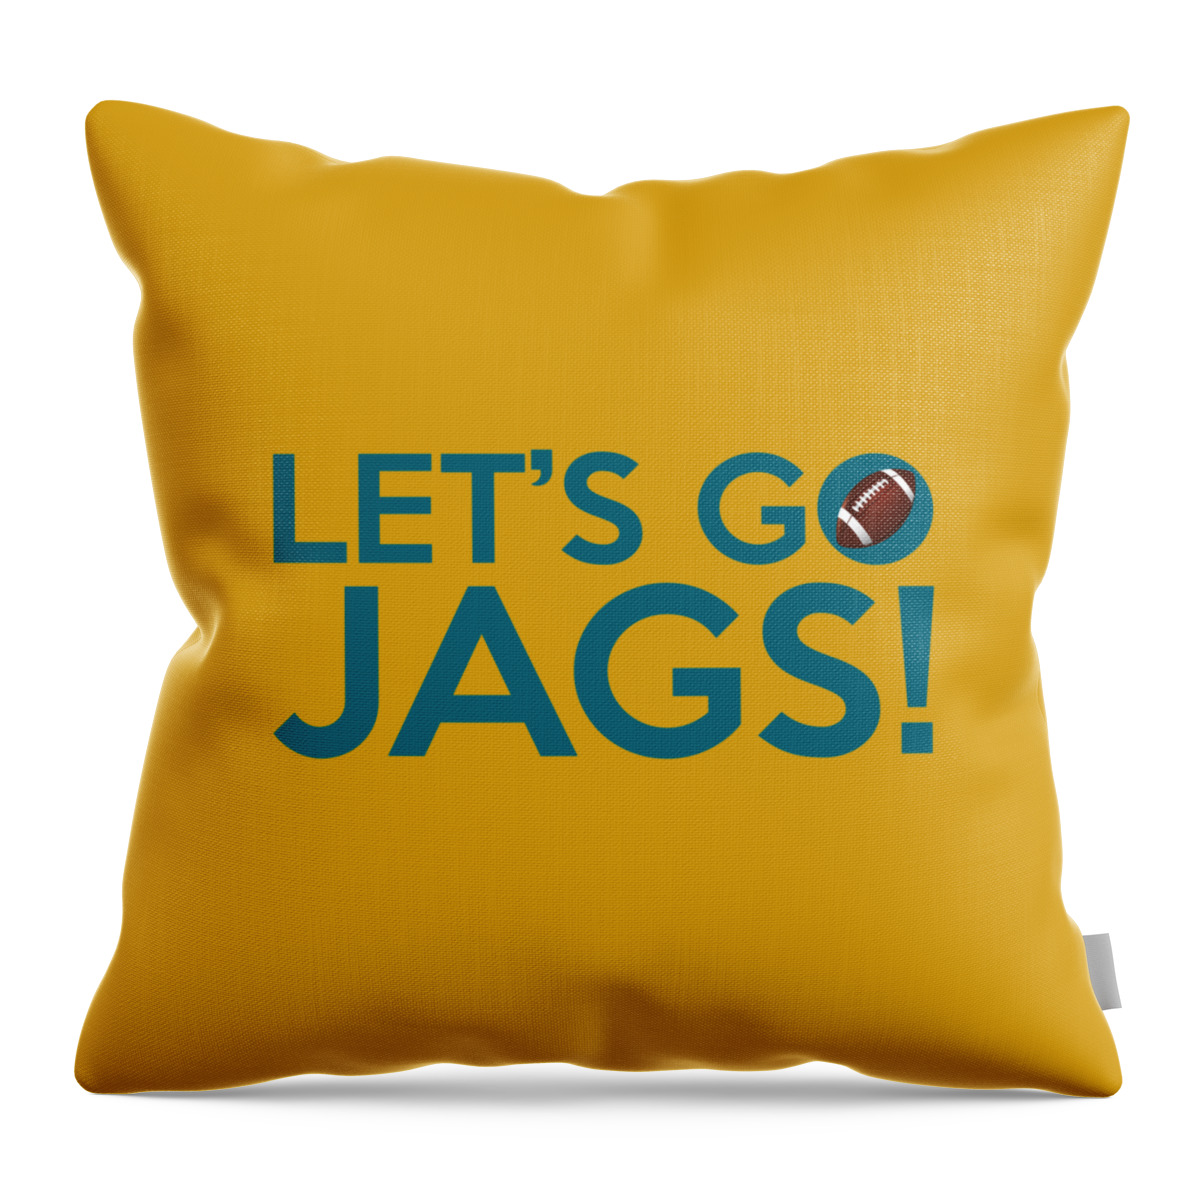 Jags Throw Pillow featuring the painting Let's Go Jags by Florian Rodarte